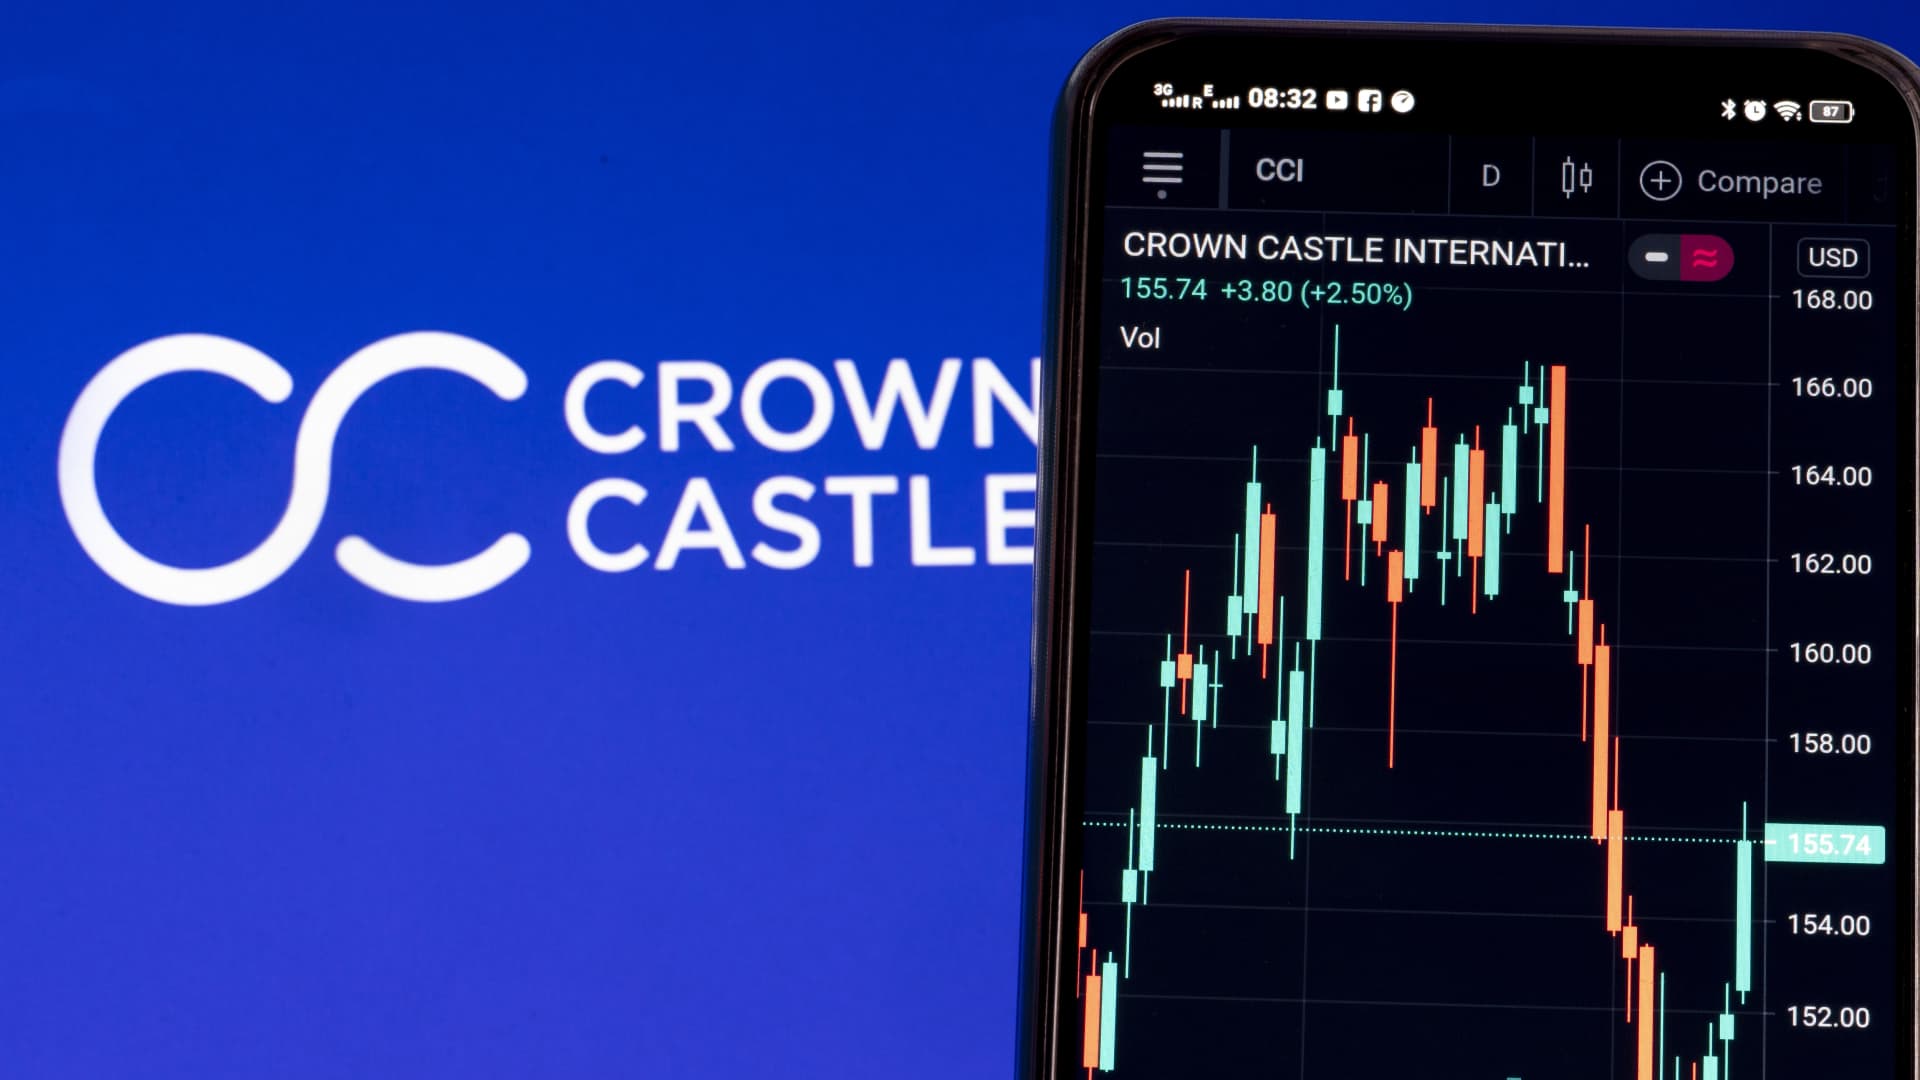 Crown Castle co-founder launches proxy struggle following Elliott rejection